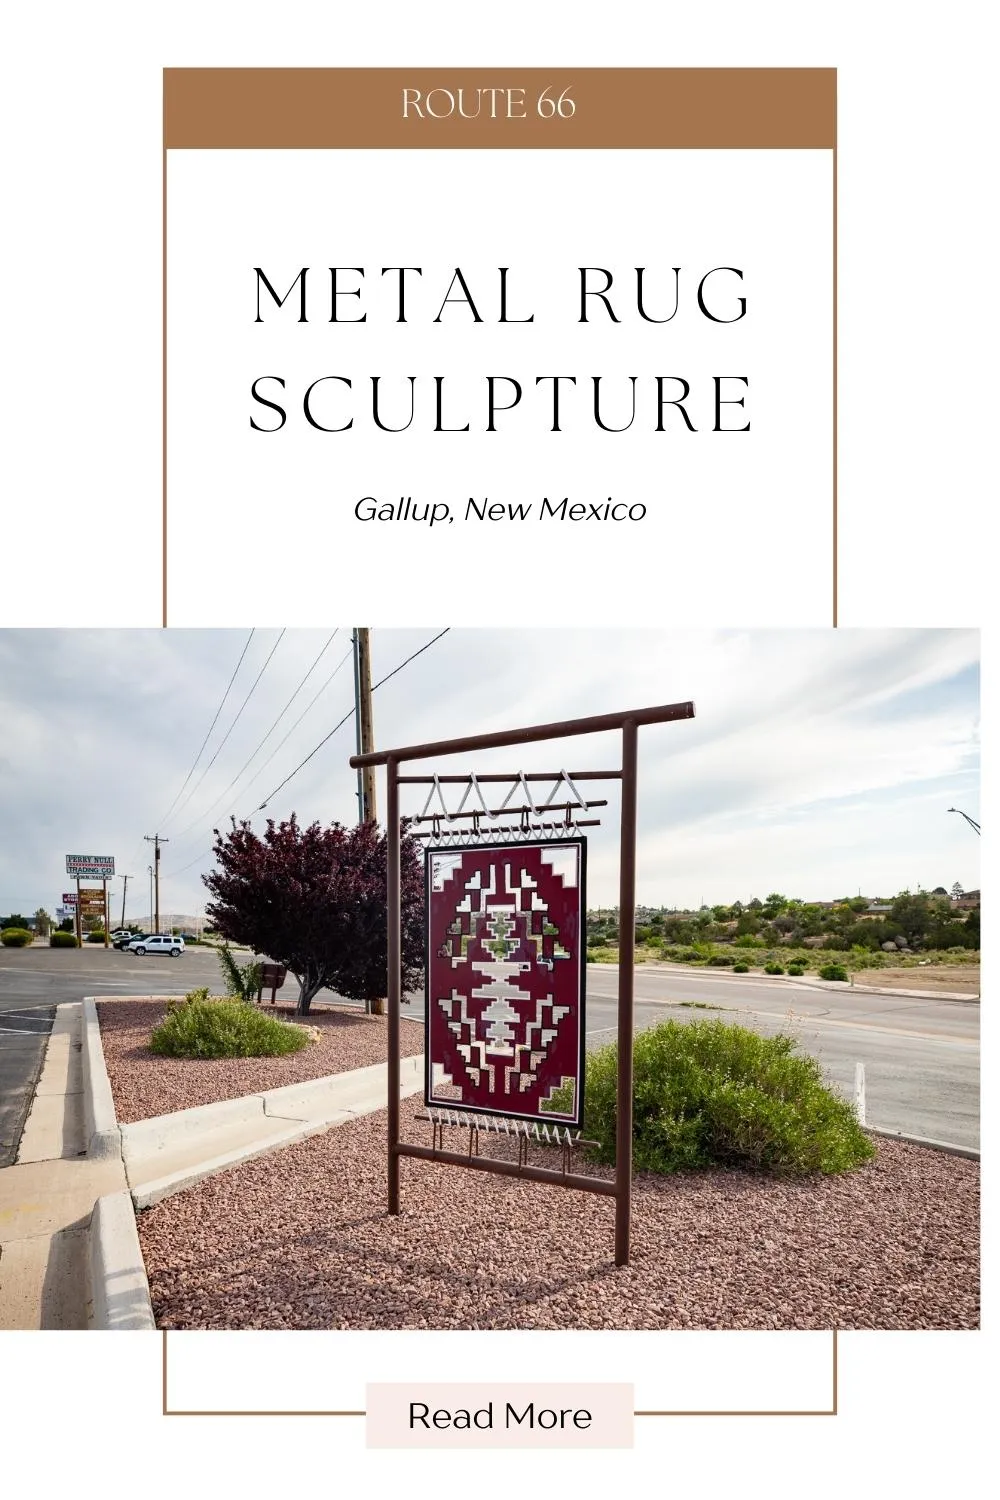 This metal rug sculpture is found in front of Perry Null Trading Company, a shop in Gallup, New Mexico that sells Native American jewelry, arts, and crafts. They specialize in silver and turquoise jewelry, pottery, carvings, and rugs. It was crafted by Navajo artist Leonardo Jim. Visit this Route 66 roadside attraction on your Route 66 road trip in New Mexico. Add it to your travel itinerary. #Route66 #Route66RoadTrip